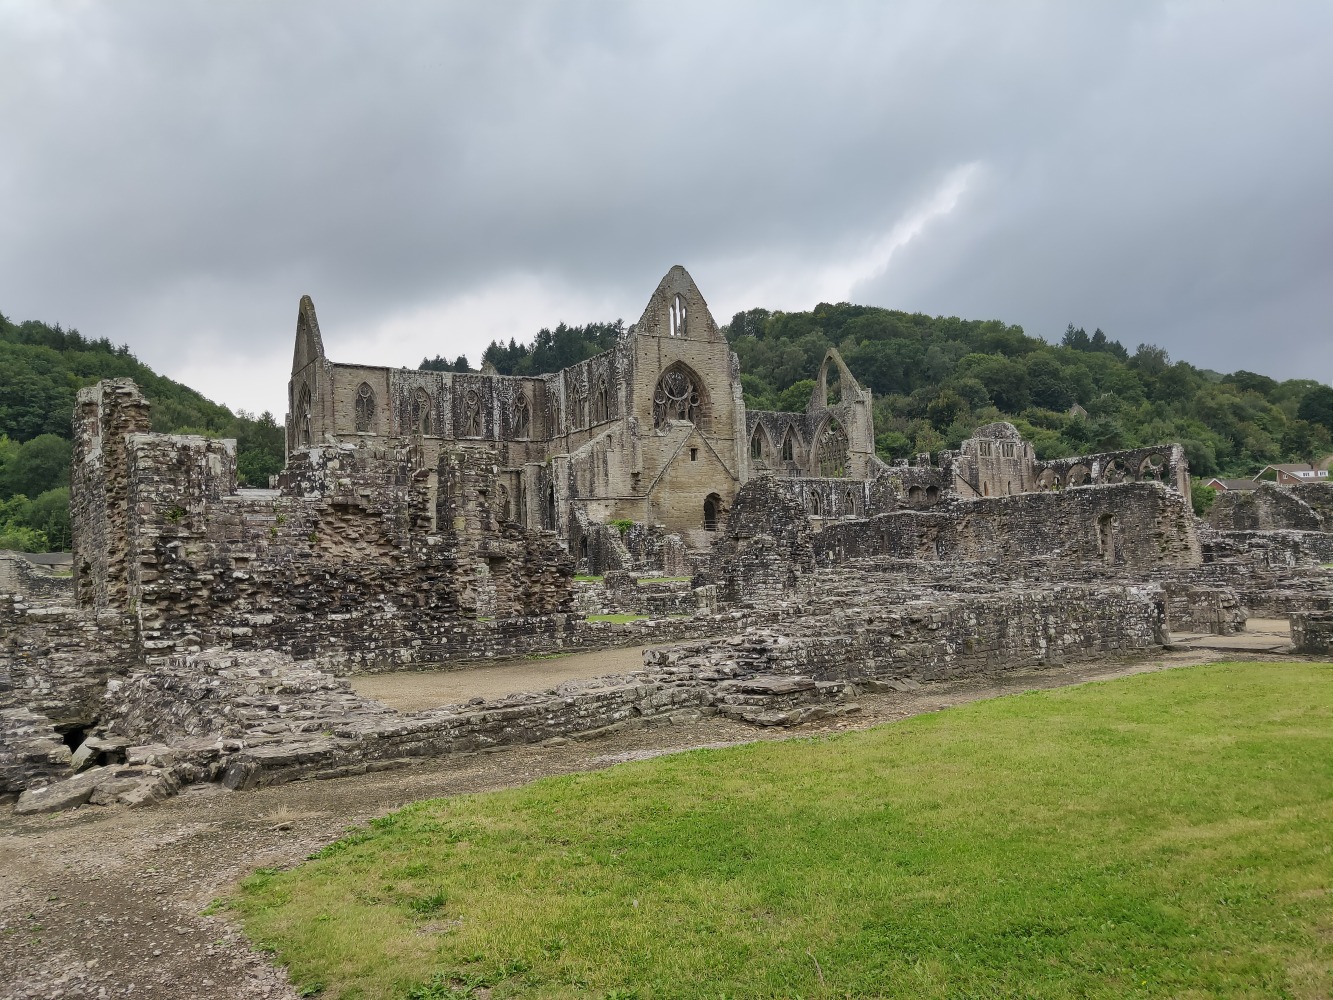 Tintern Abbey in the Wye Valley in Wales